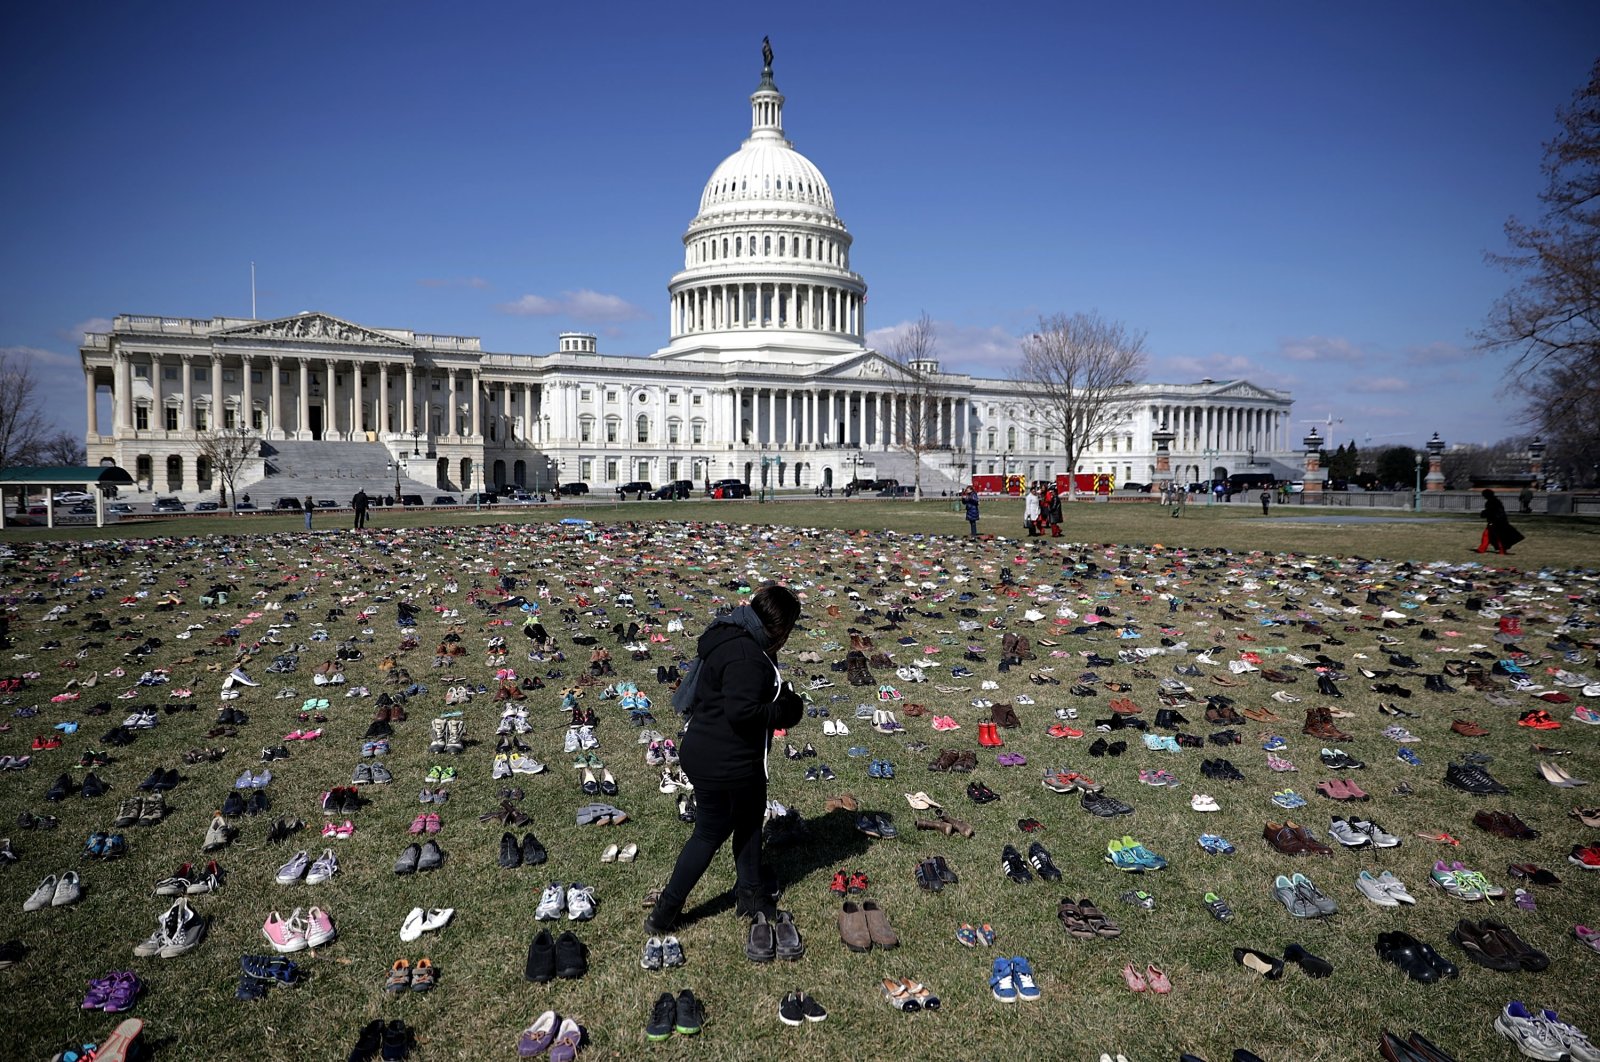 Some seven thousand pairs of shoes representing the children killed by gun violence since the mass shooting at Sandy Hook Elementary School in 2012 are seen in Washington, D.C., U.S., March 13, 2018. (AFP Photo)